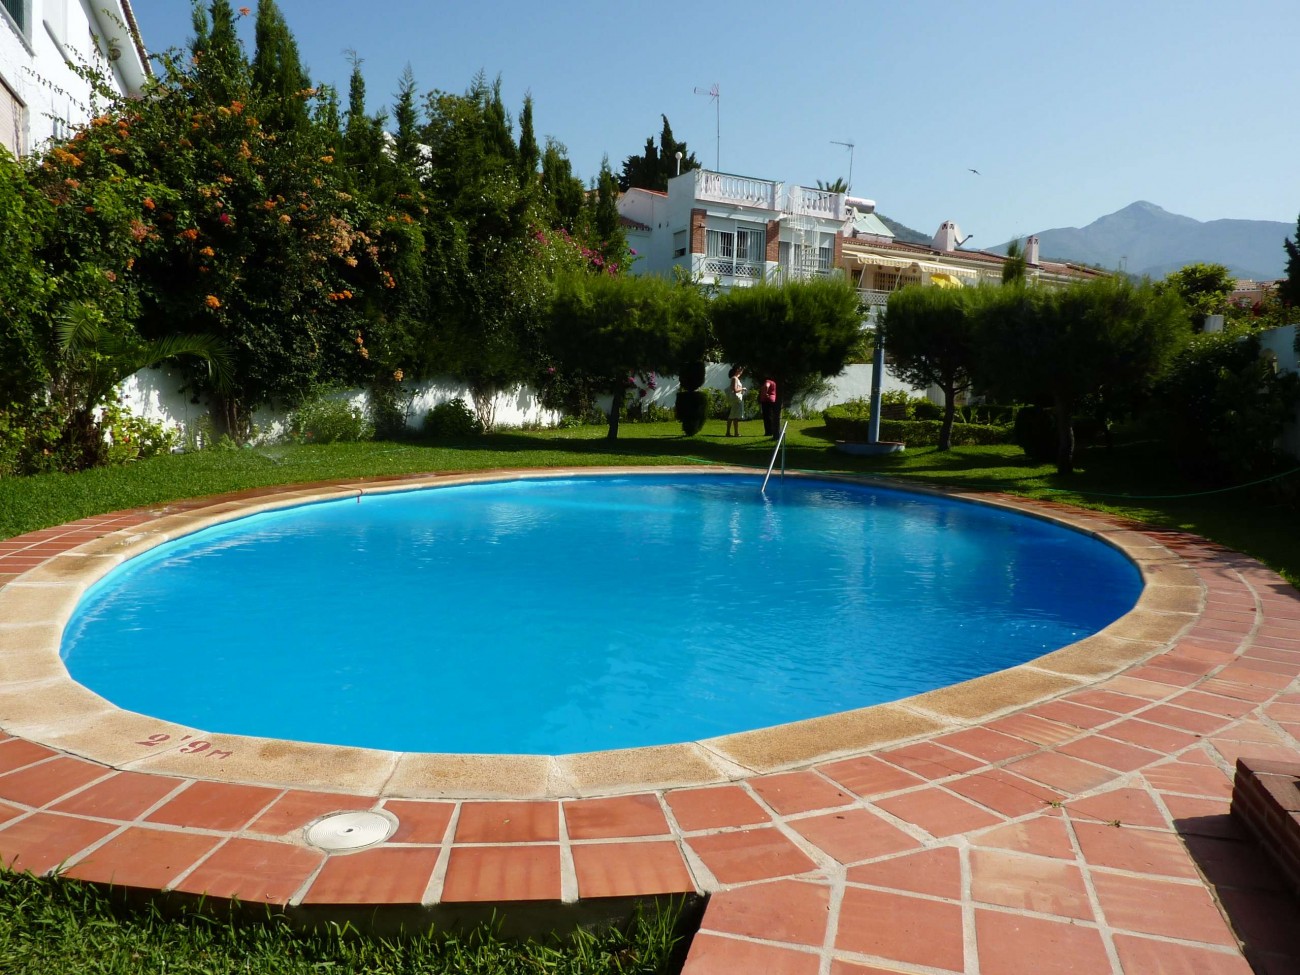 Townhouse for sale in Nerja 3